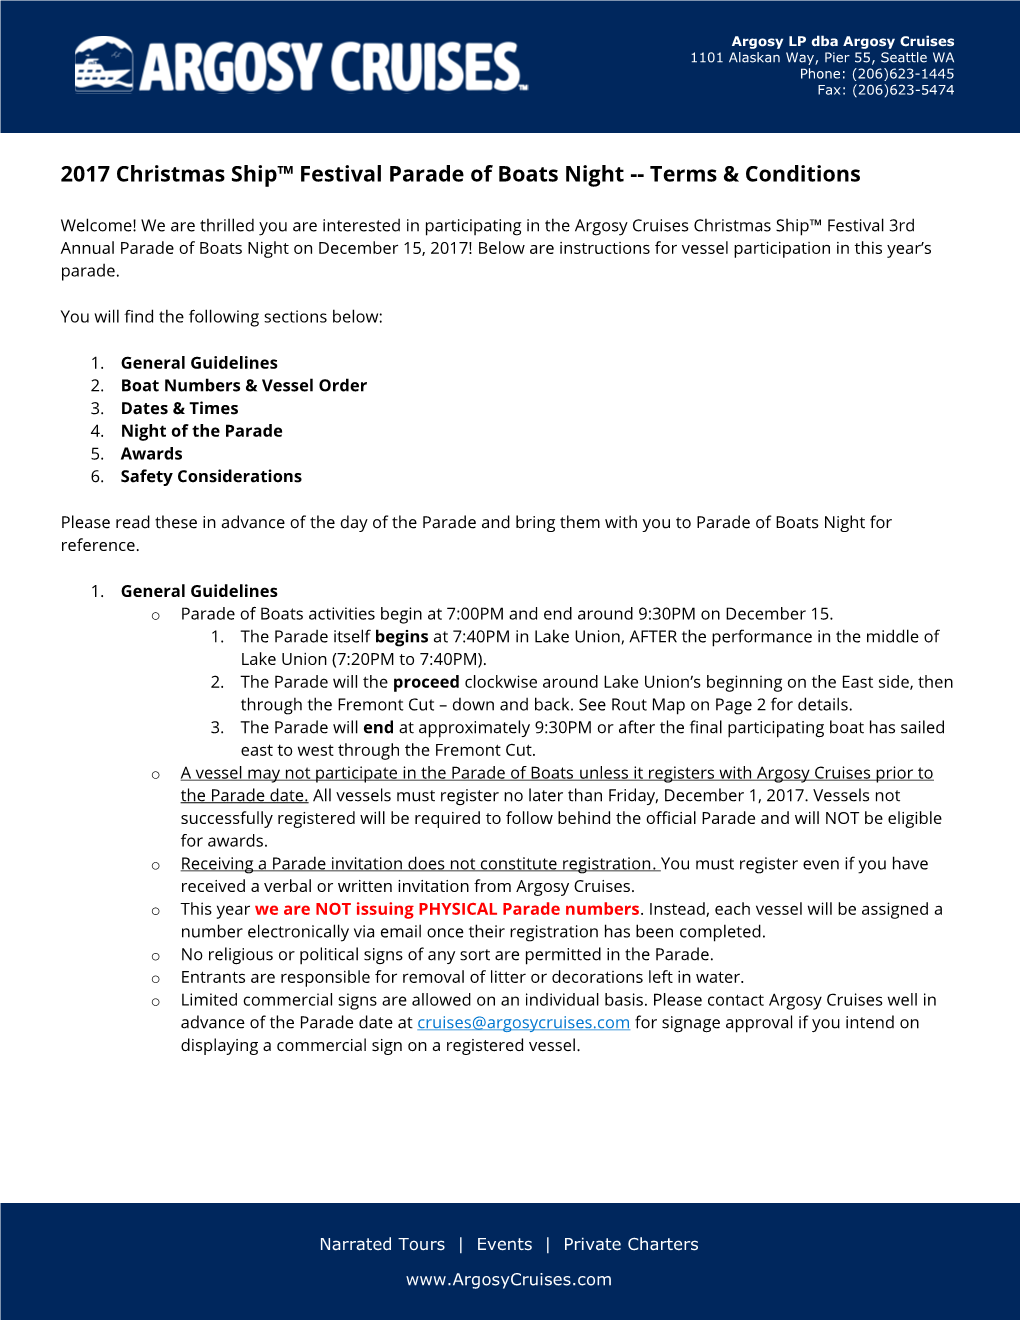 2017 Christmas Ship™ Festival Parade of Boats Night -- Terms & Conditions